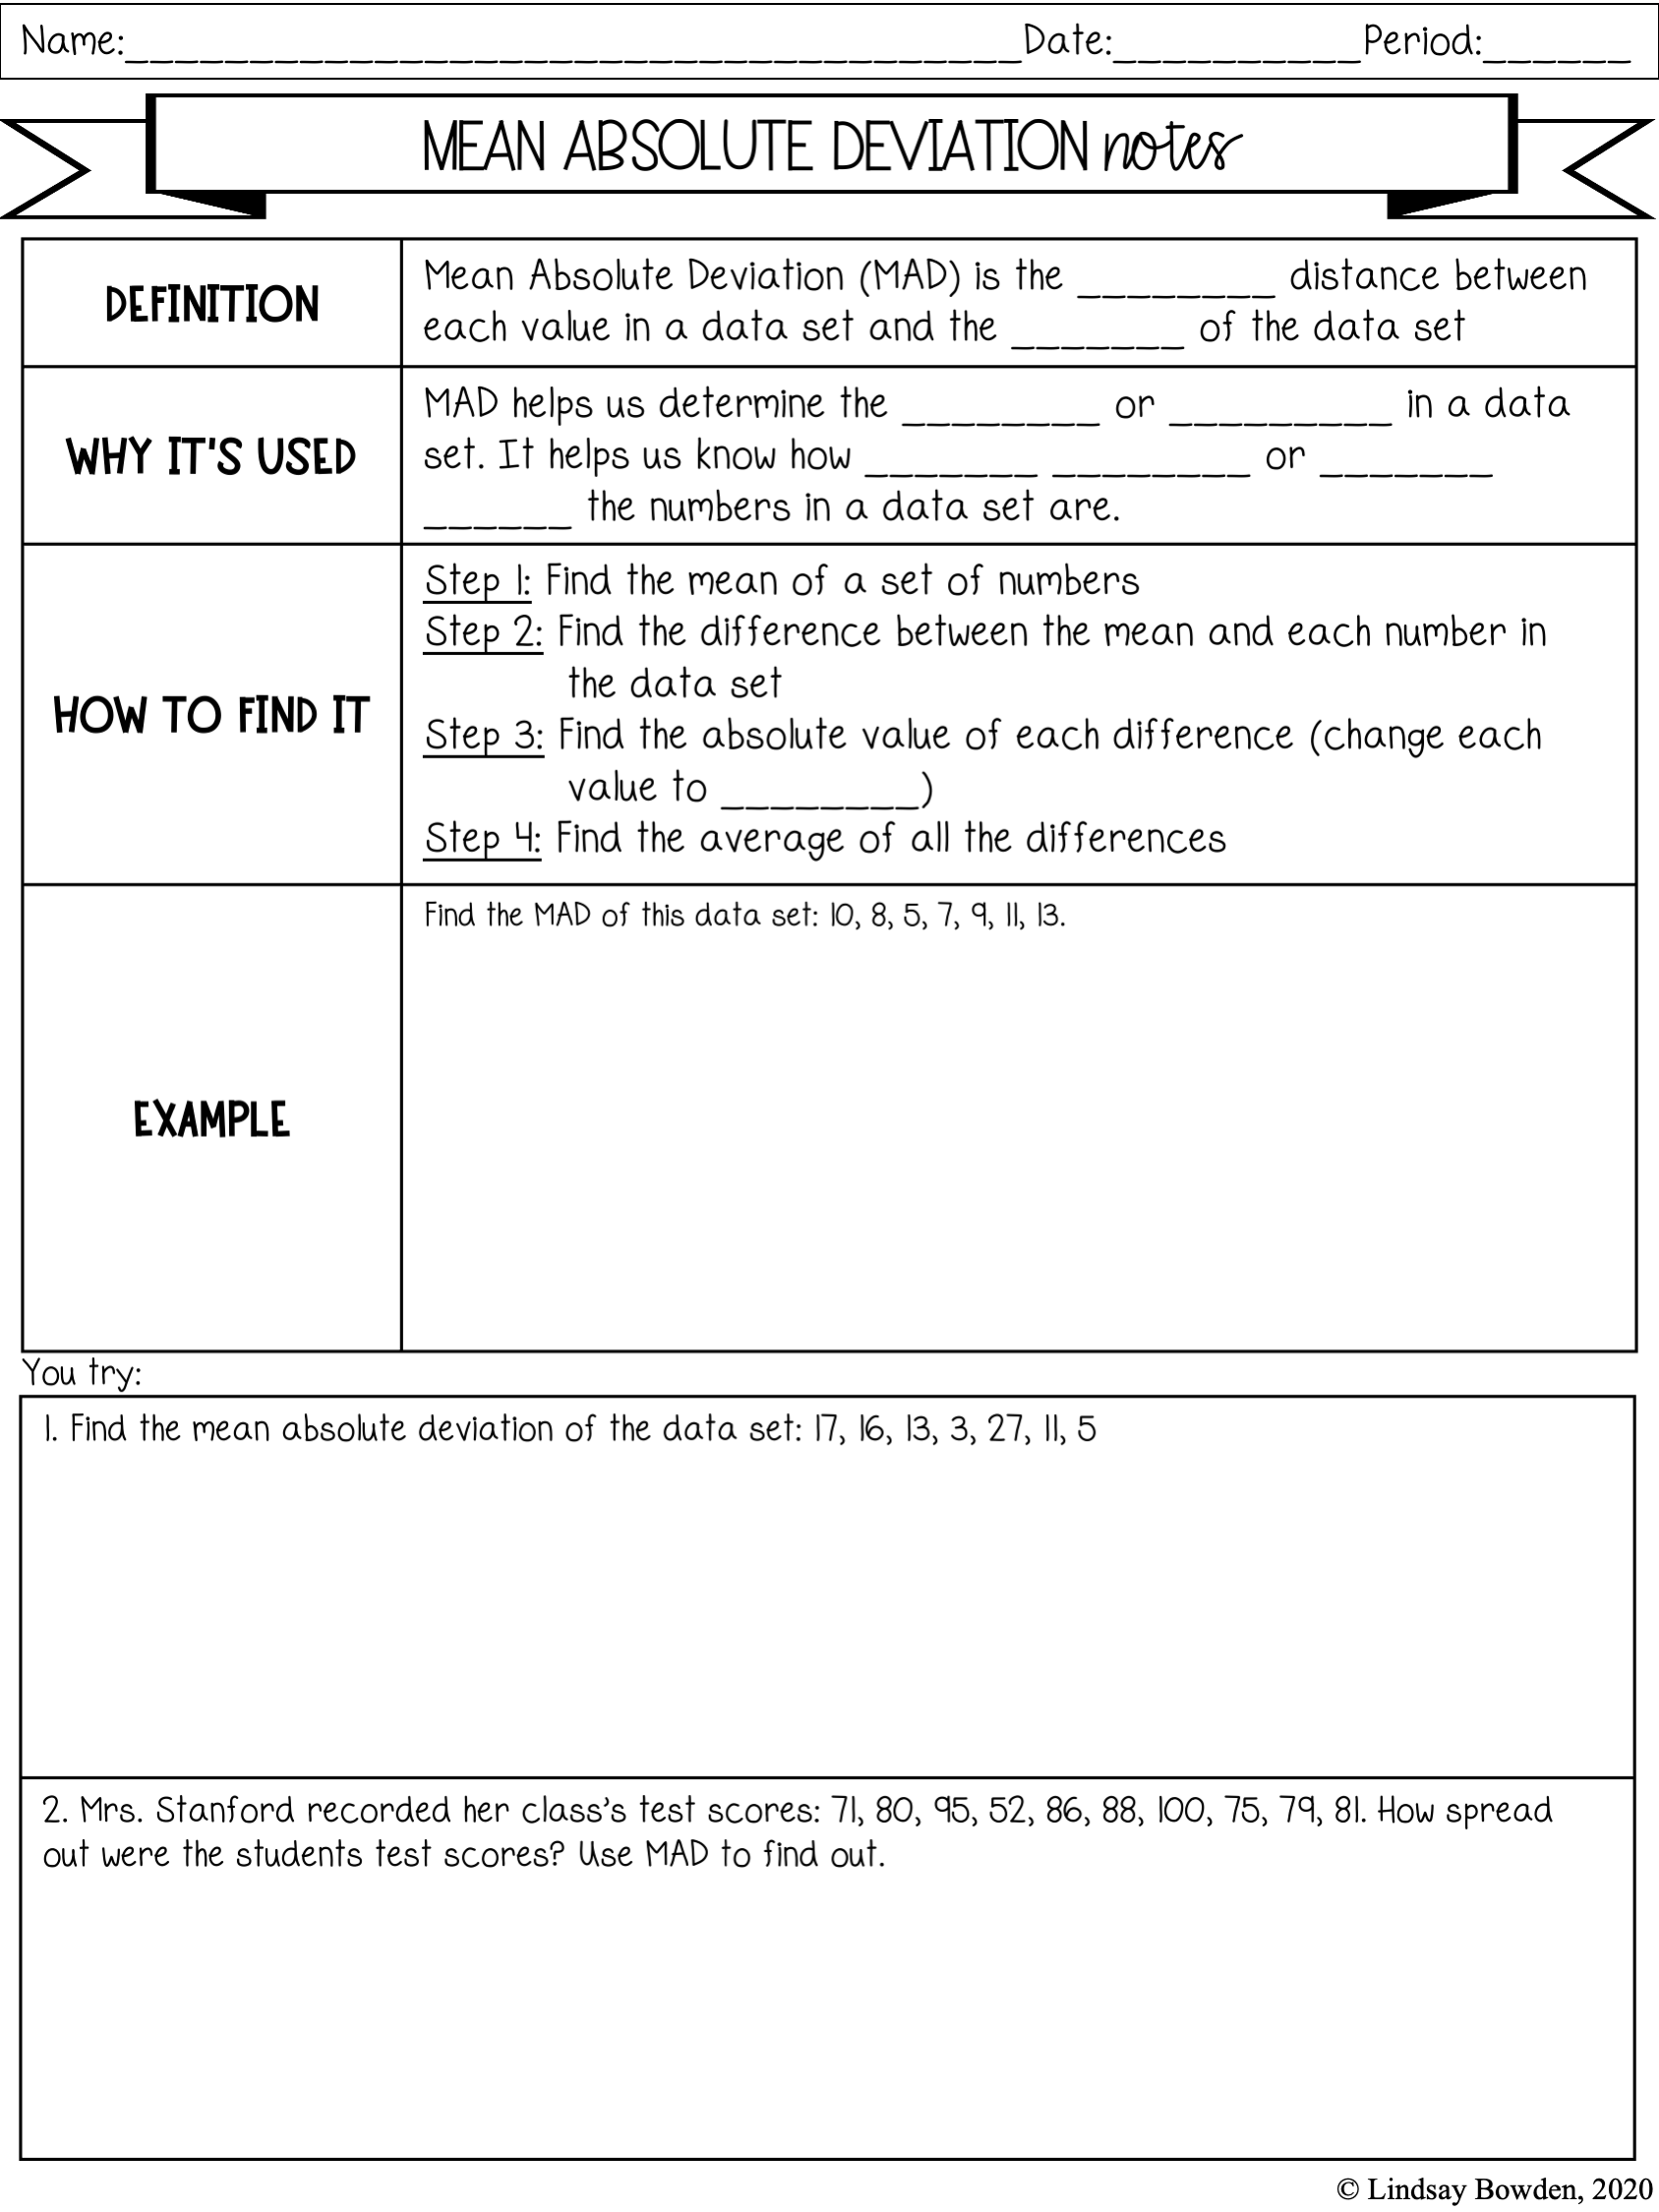 Mean Absolute Value Notes and Worksheets - Lindsay Bowden Pertaining To Mean Absolute Deviation Worksheet